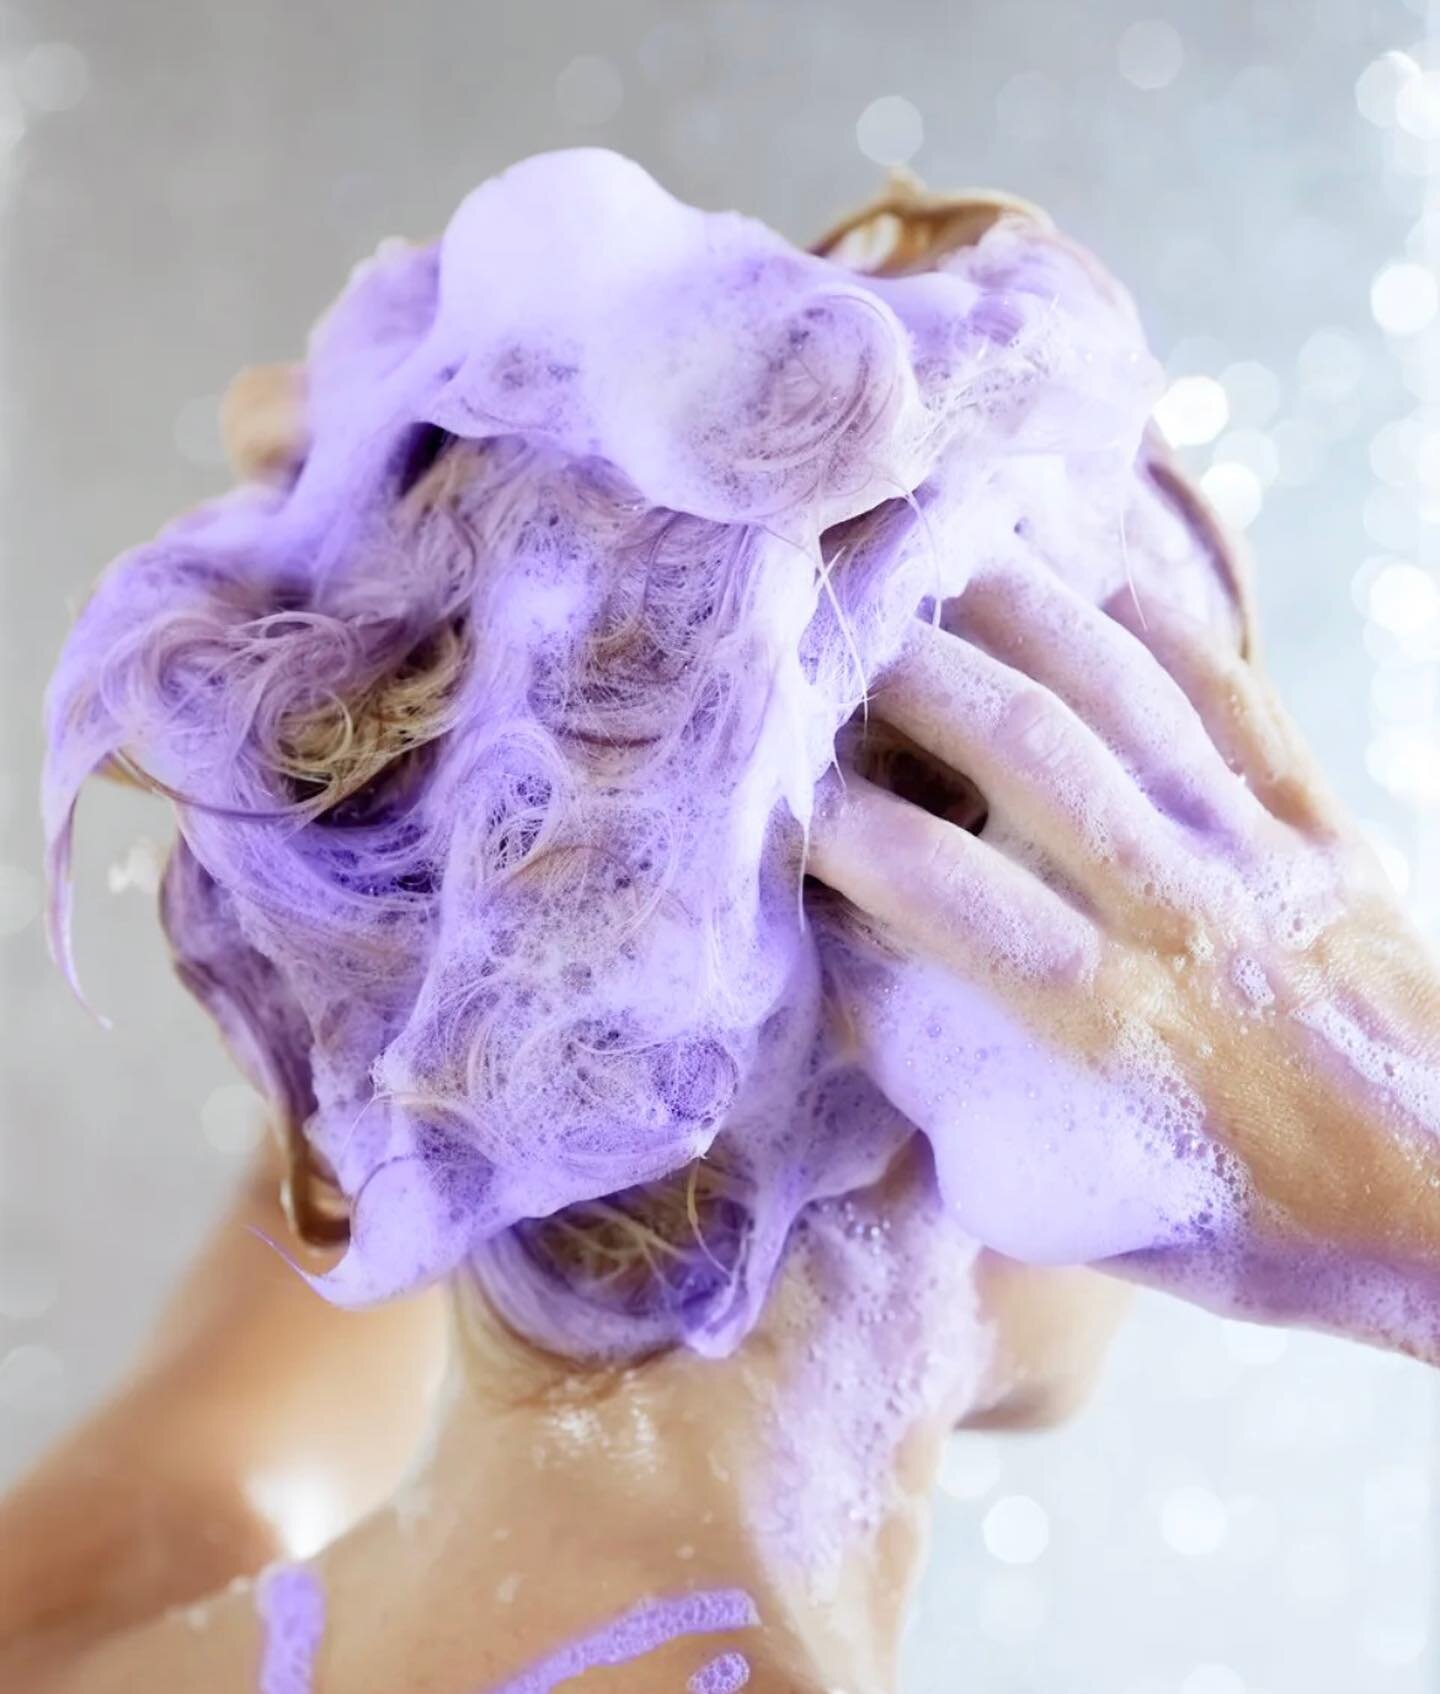 Swipe for our favorite purple shampoo to keep blondes bright 💜